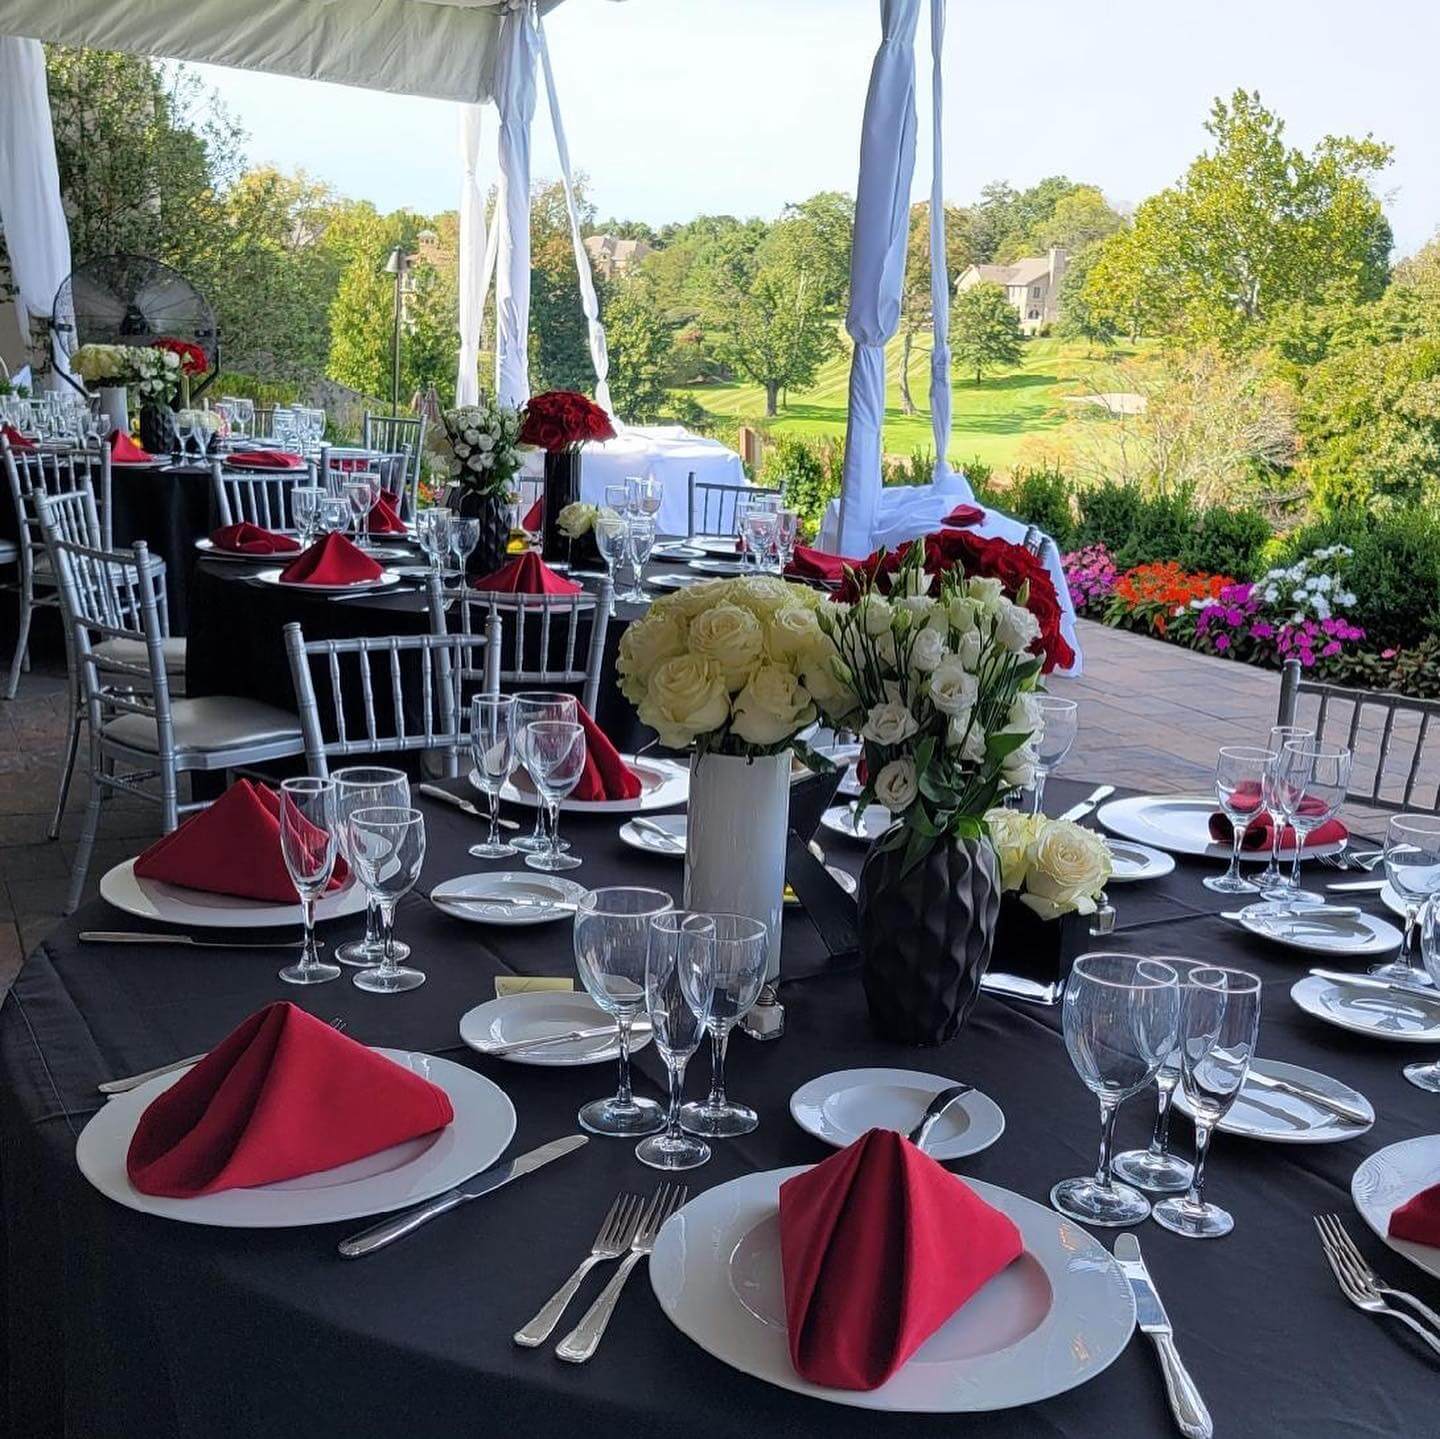 Outdoor table settings and decorations for a bar mitzvah event in New Jersey